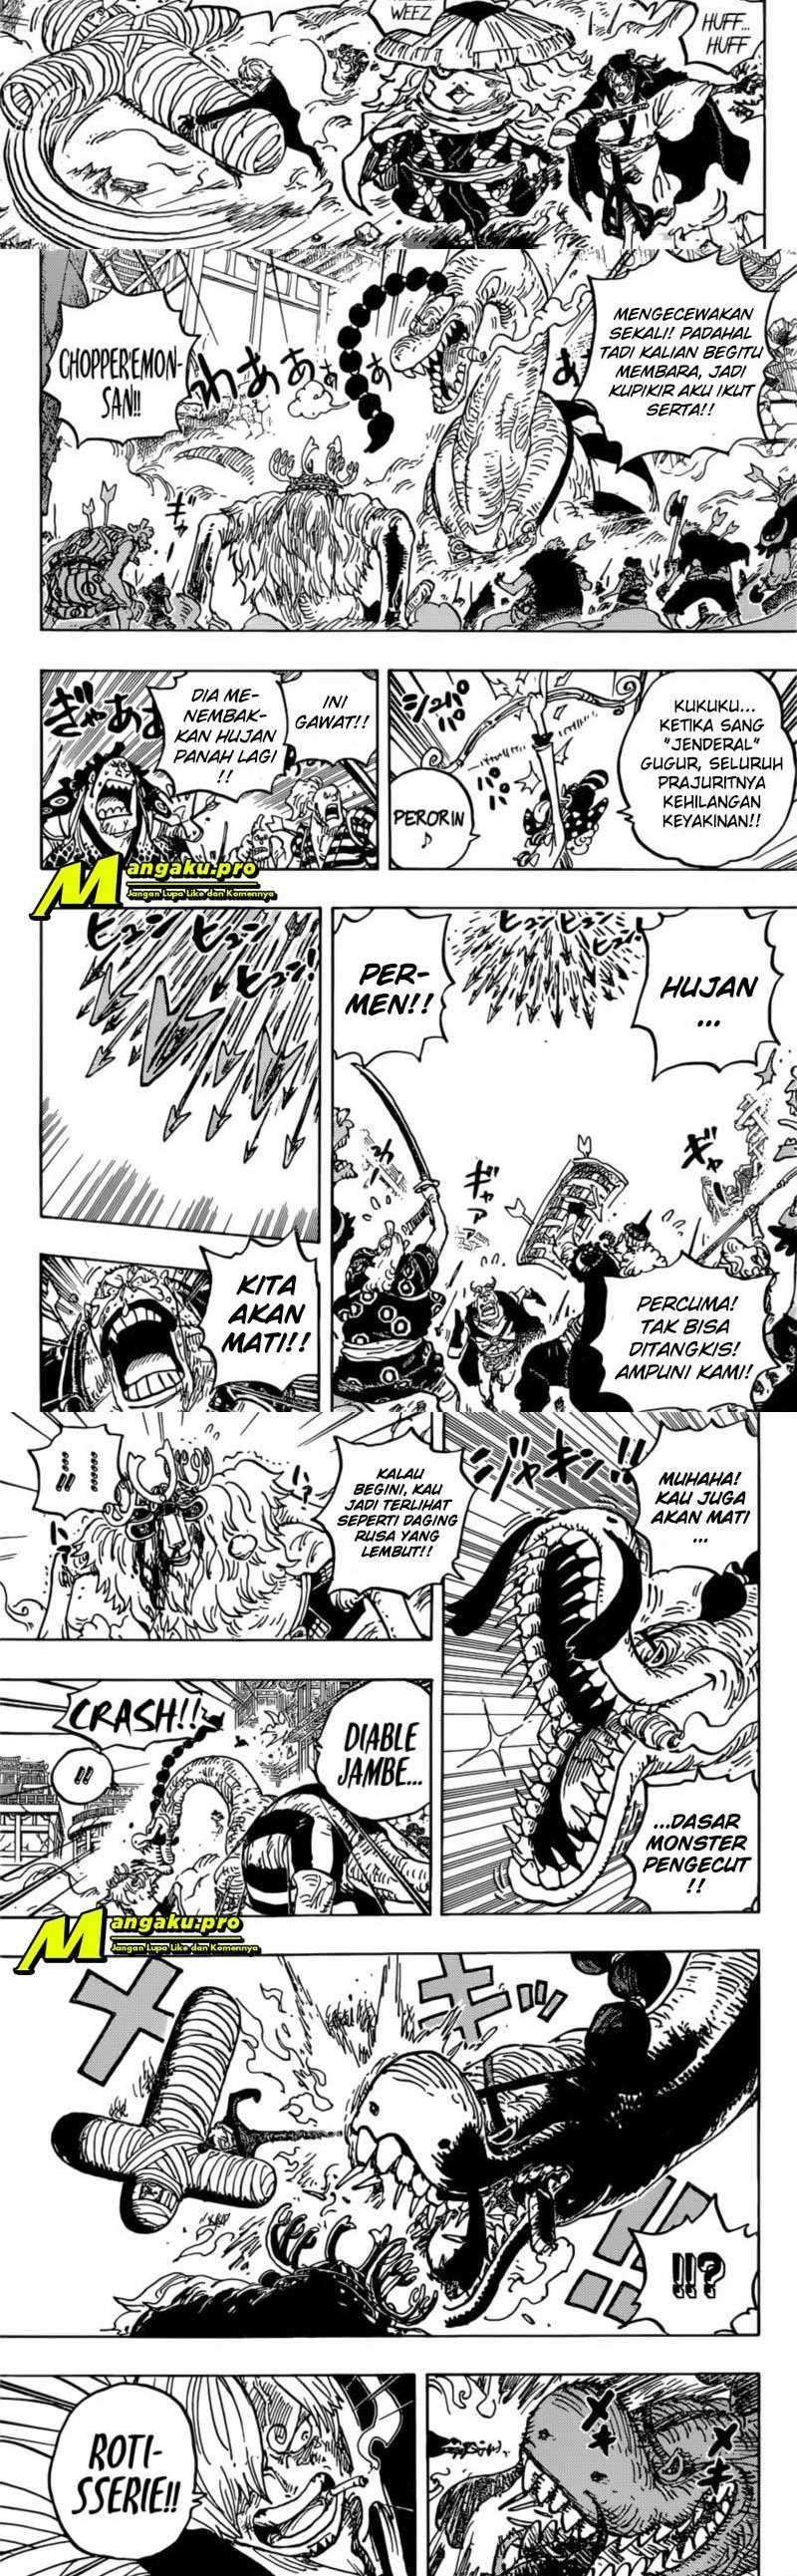 One Piece Chapter 1015 hq